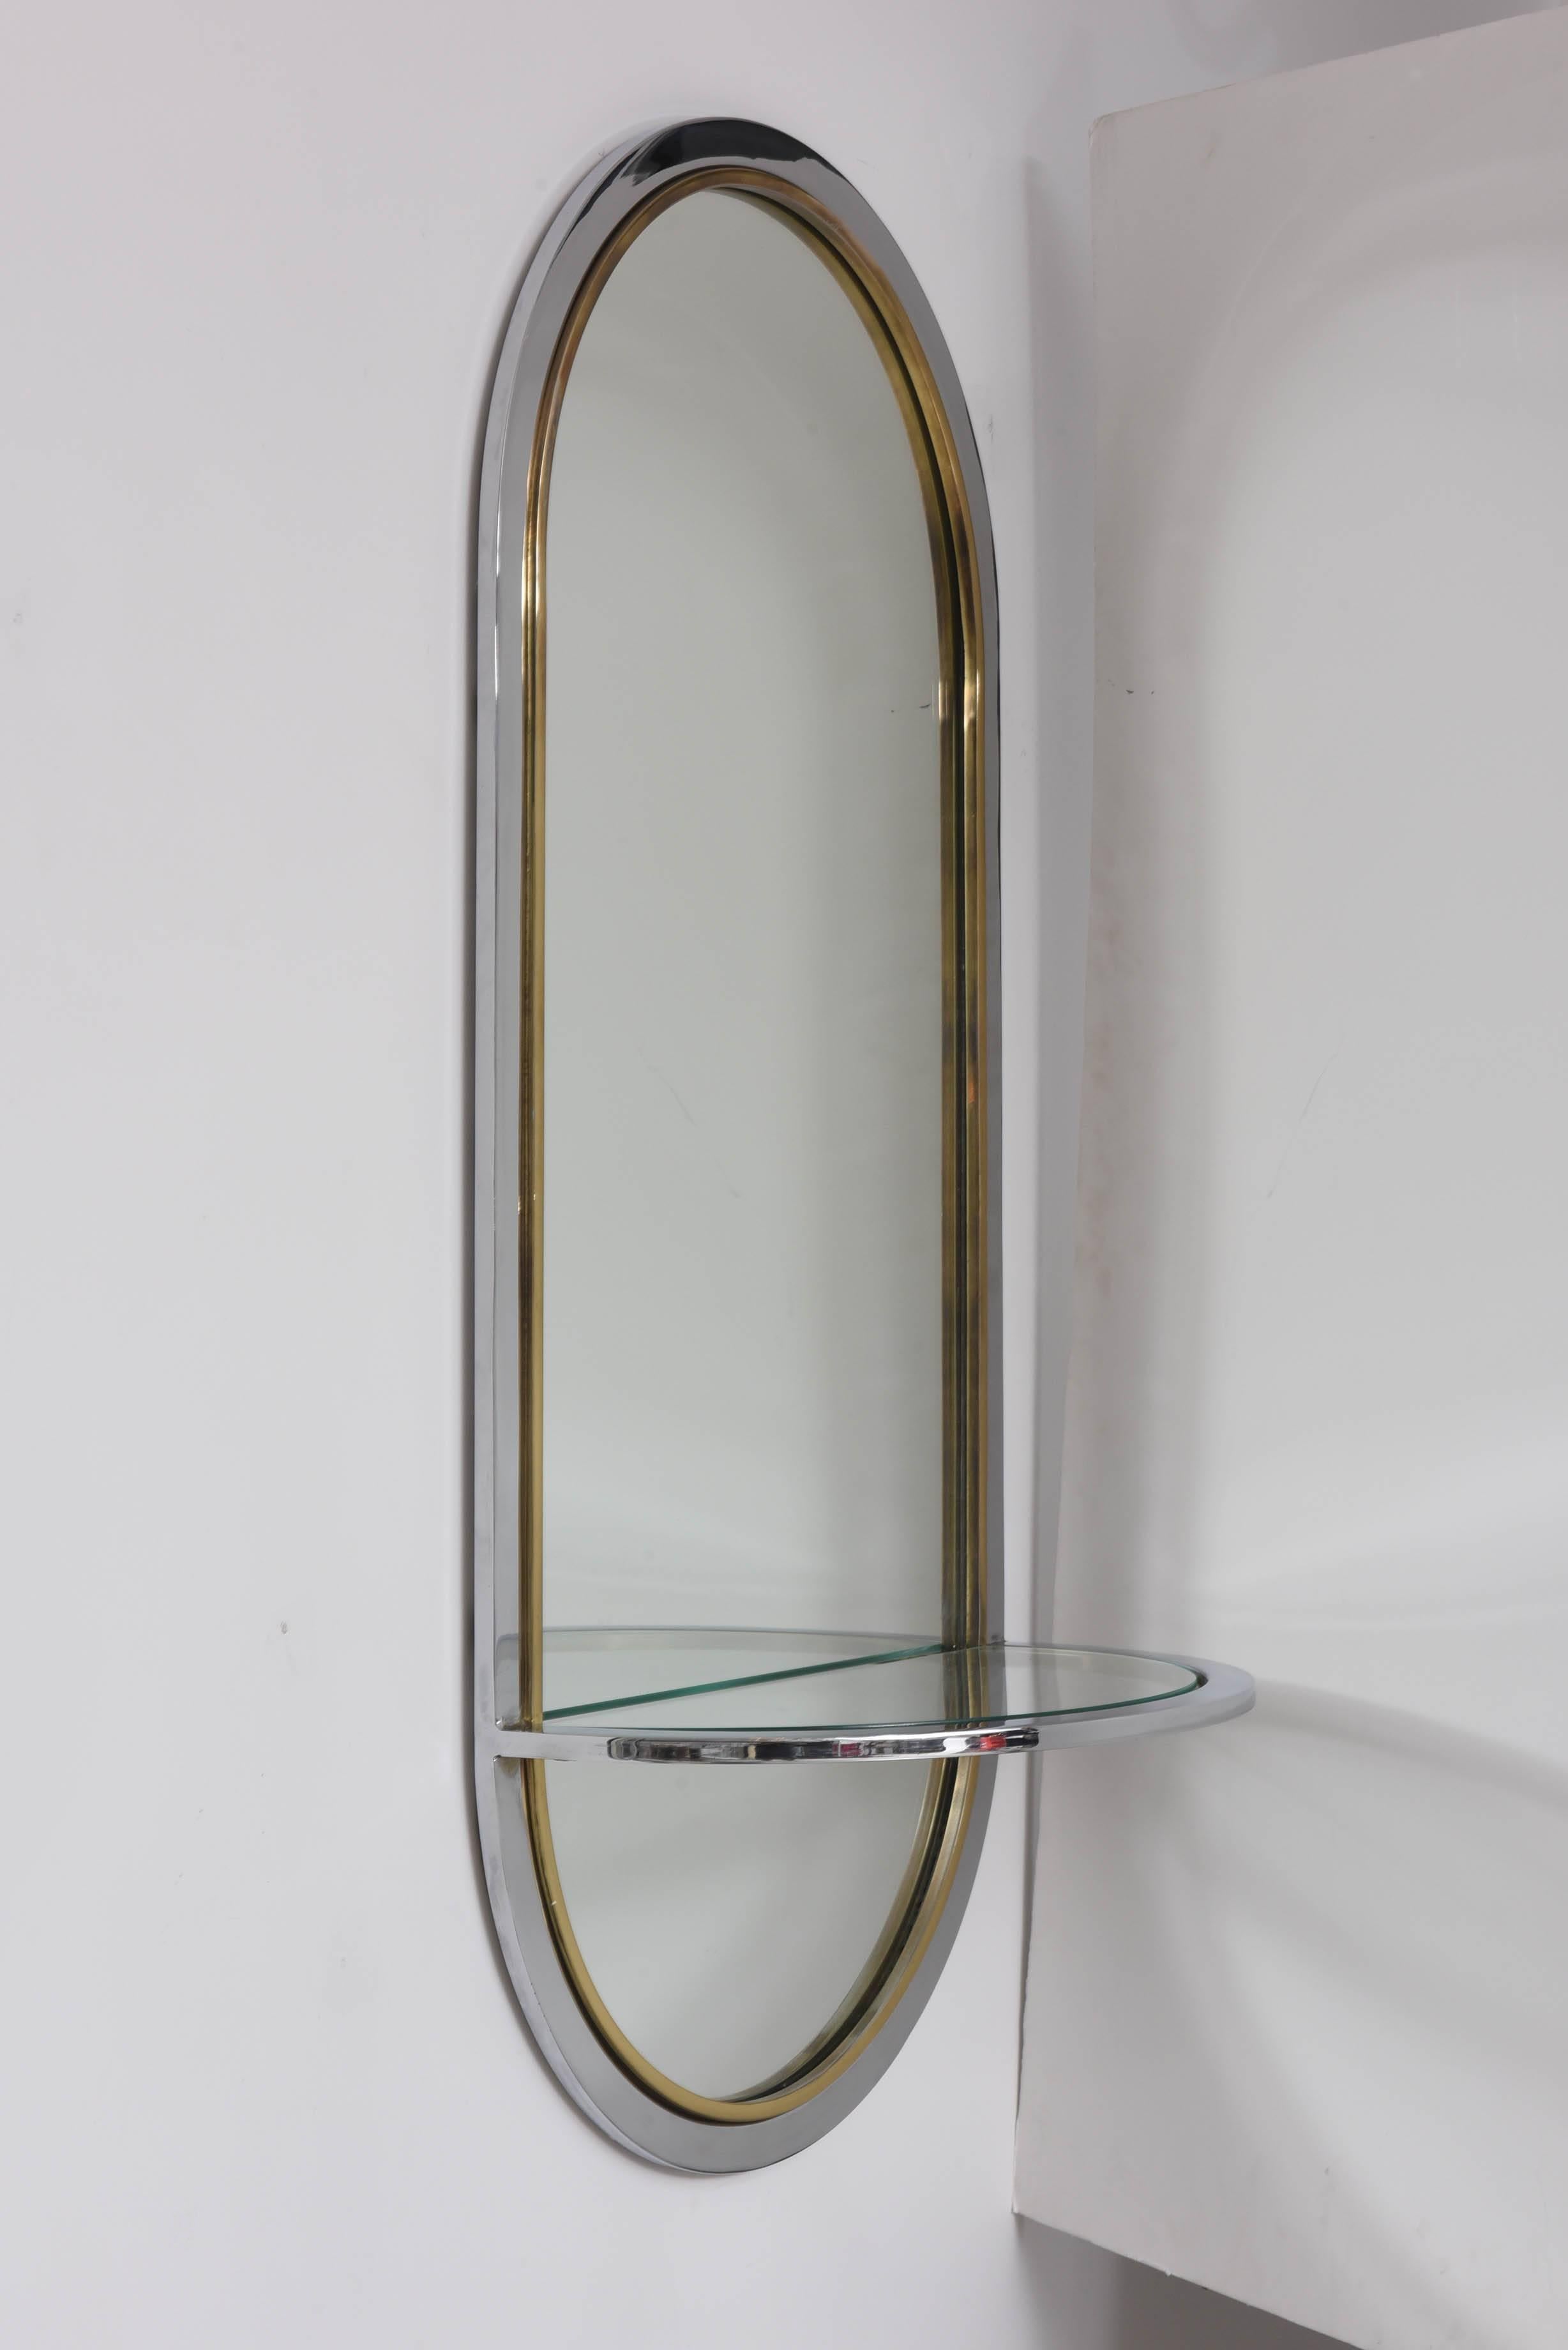 Plated Midcentury Chrome Wall-Hung Mirror with Shelf, for DIA, 1970s